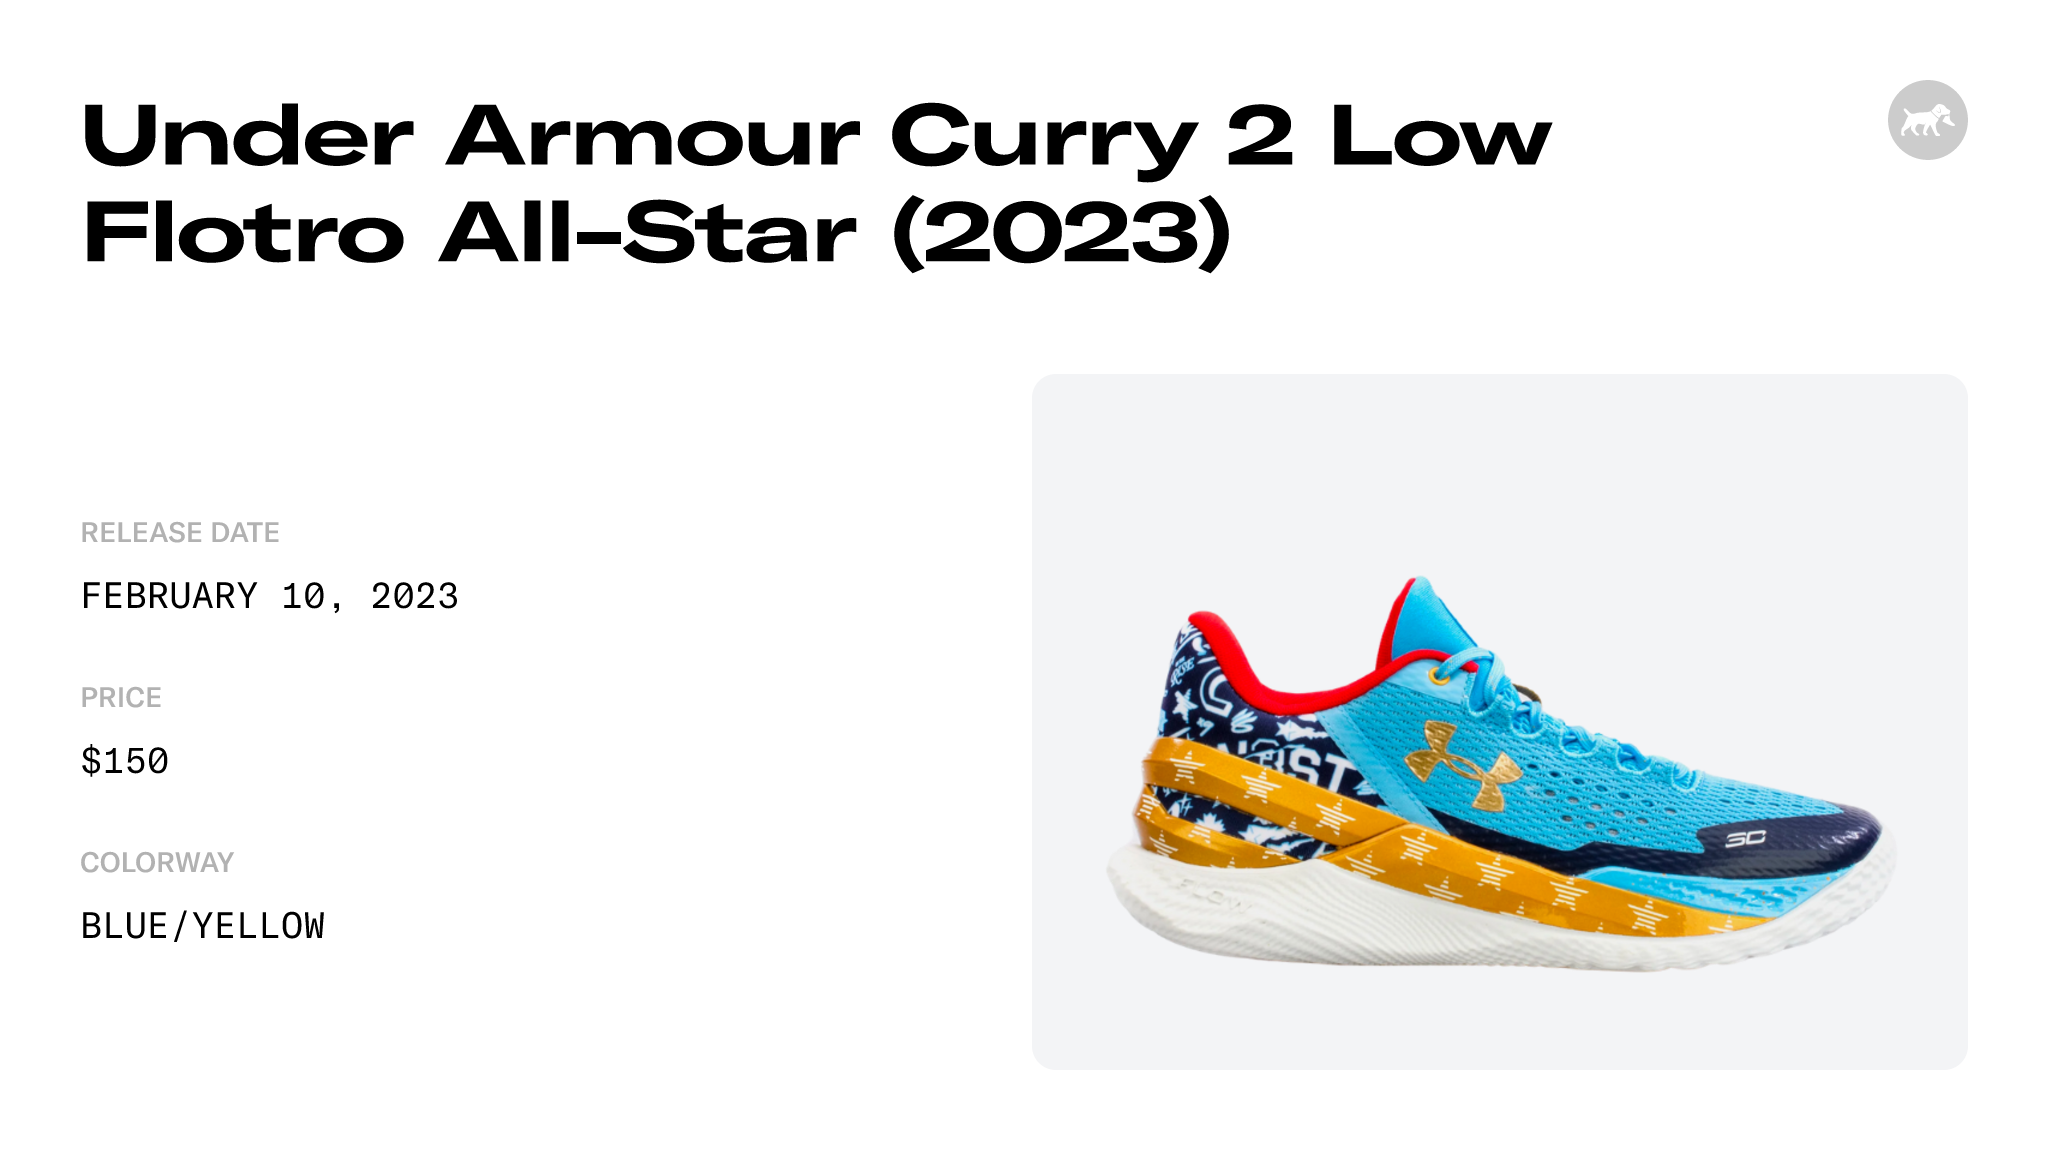 Under Armour Curry 2 Low Flotro All-Star (2023) - 3026276-402